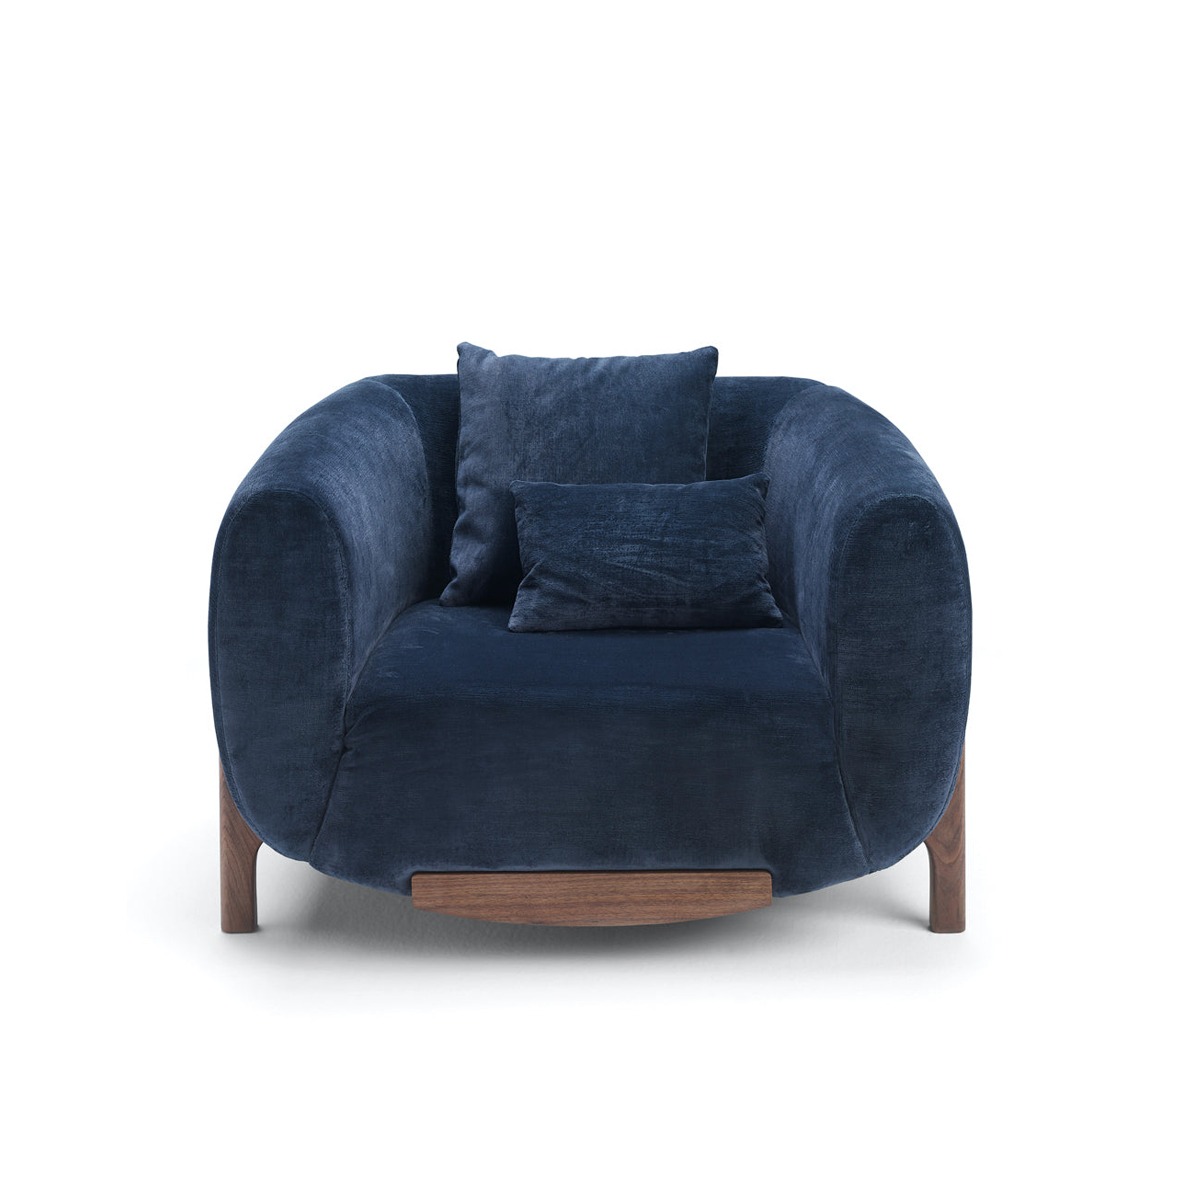 Agrippa Gino Armchair - 2colors